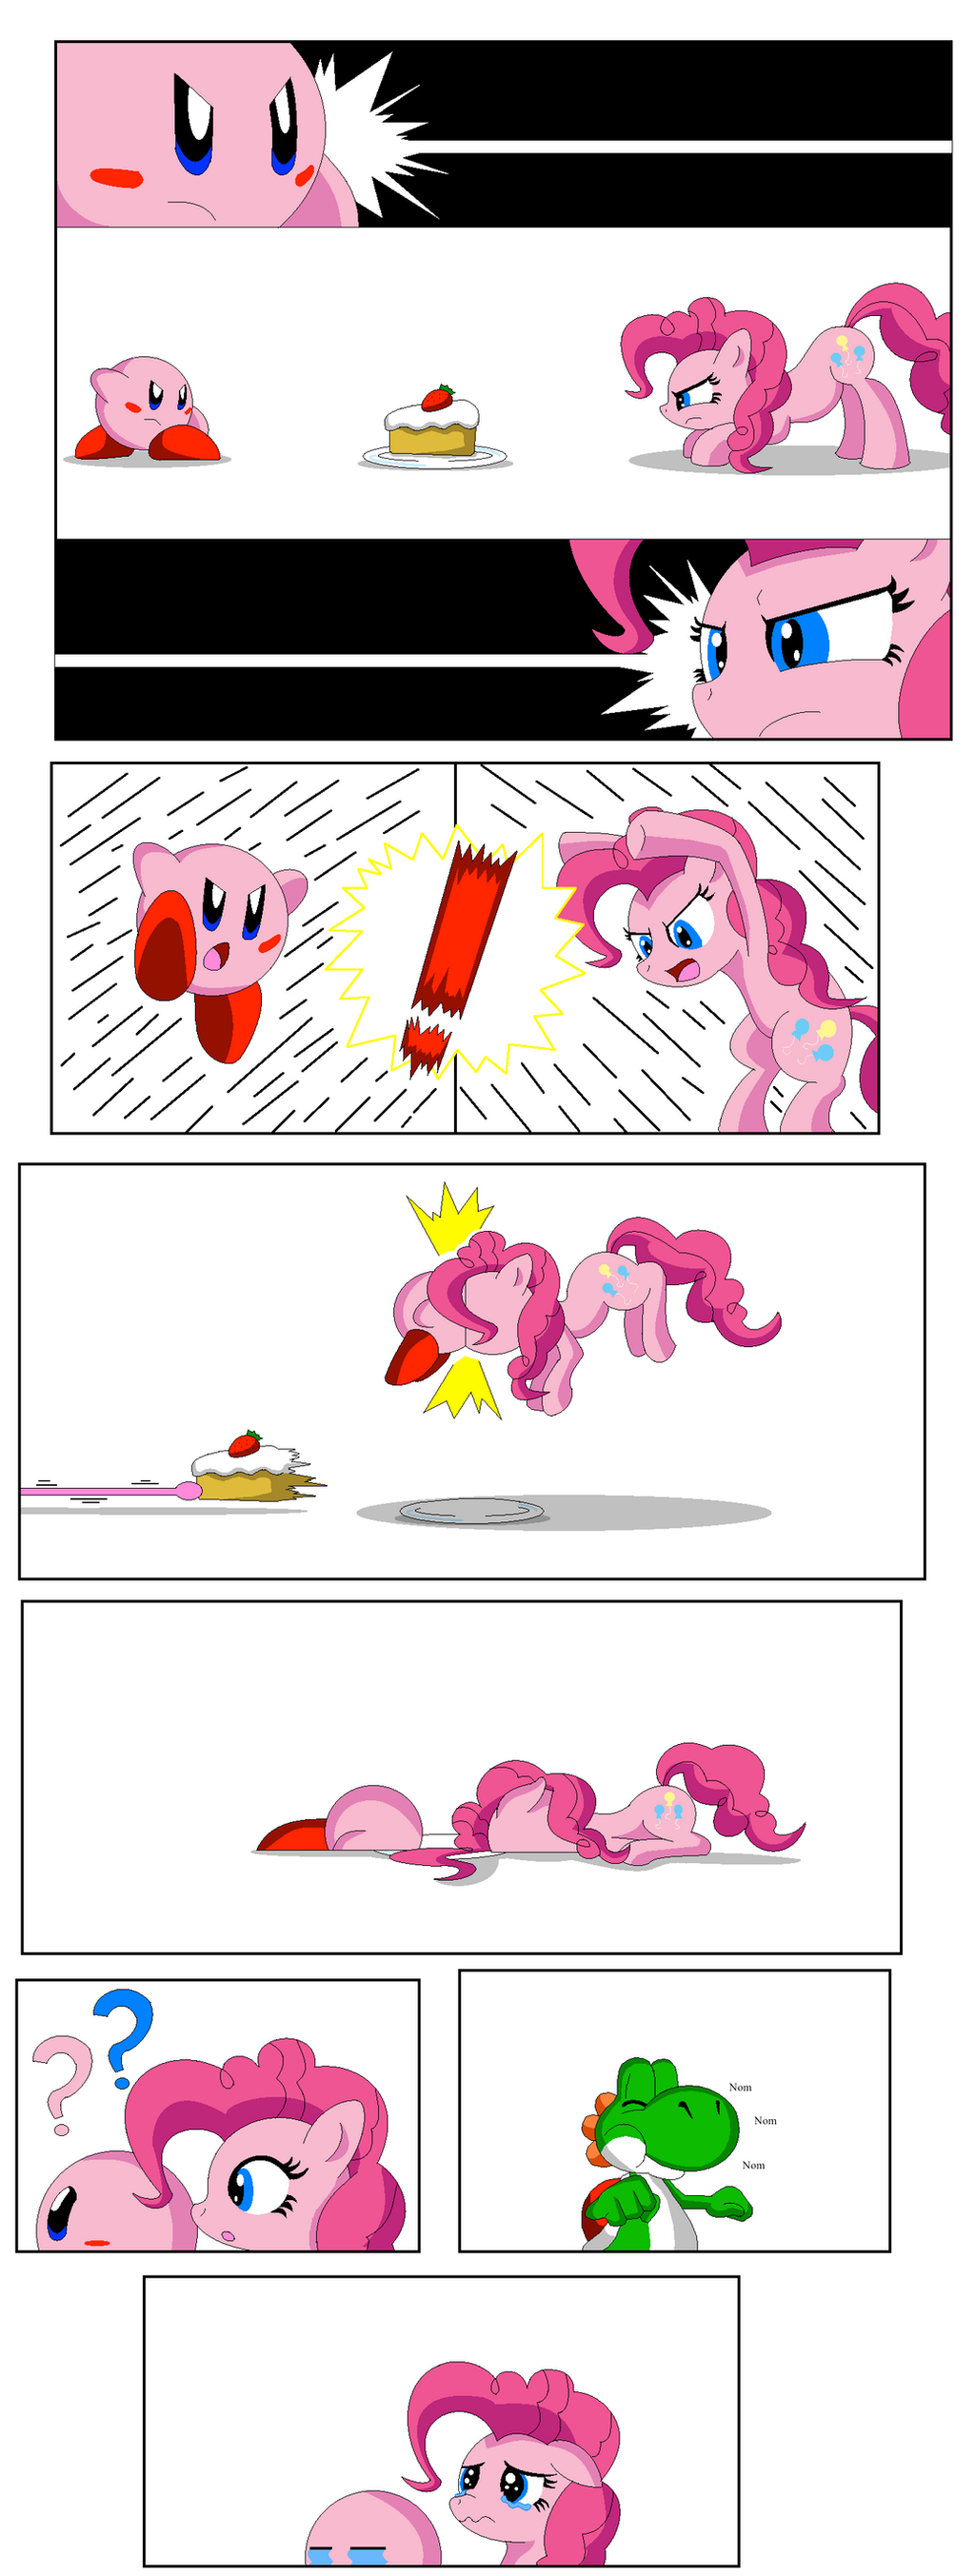 pinkie_pie_vs_kirby_by_koopa_master-d5vab8a.png